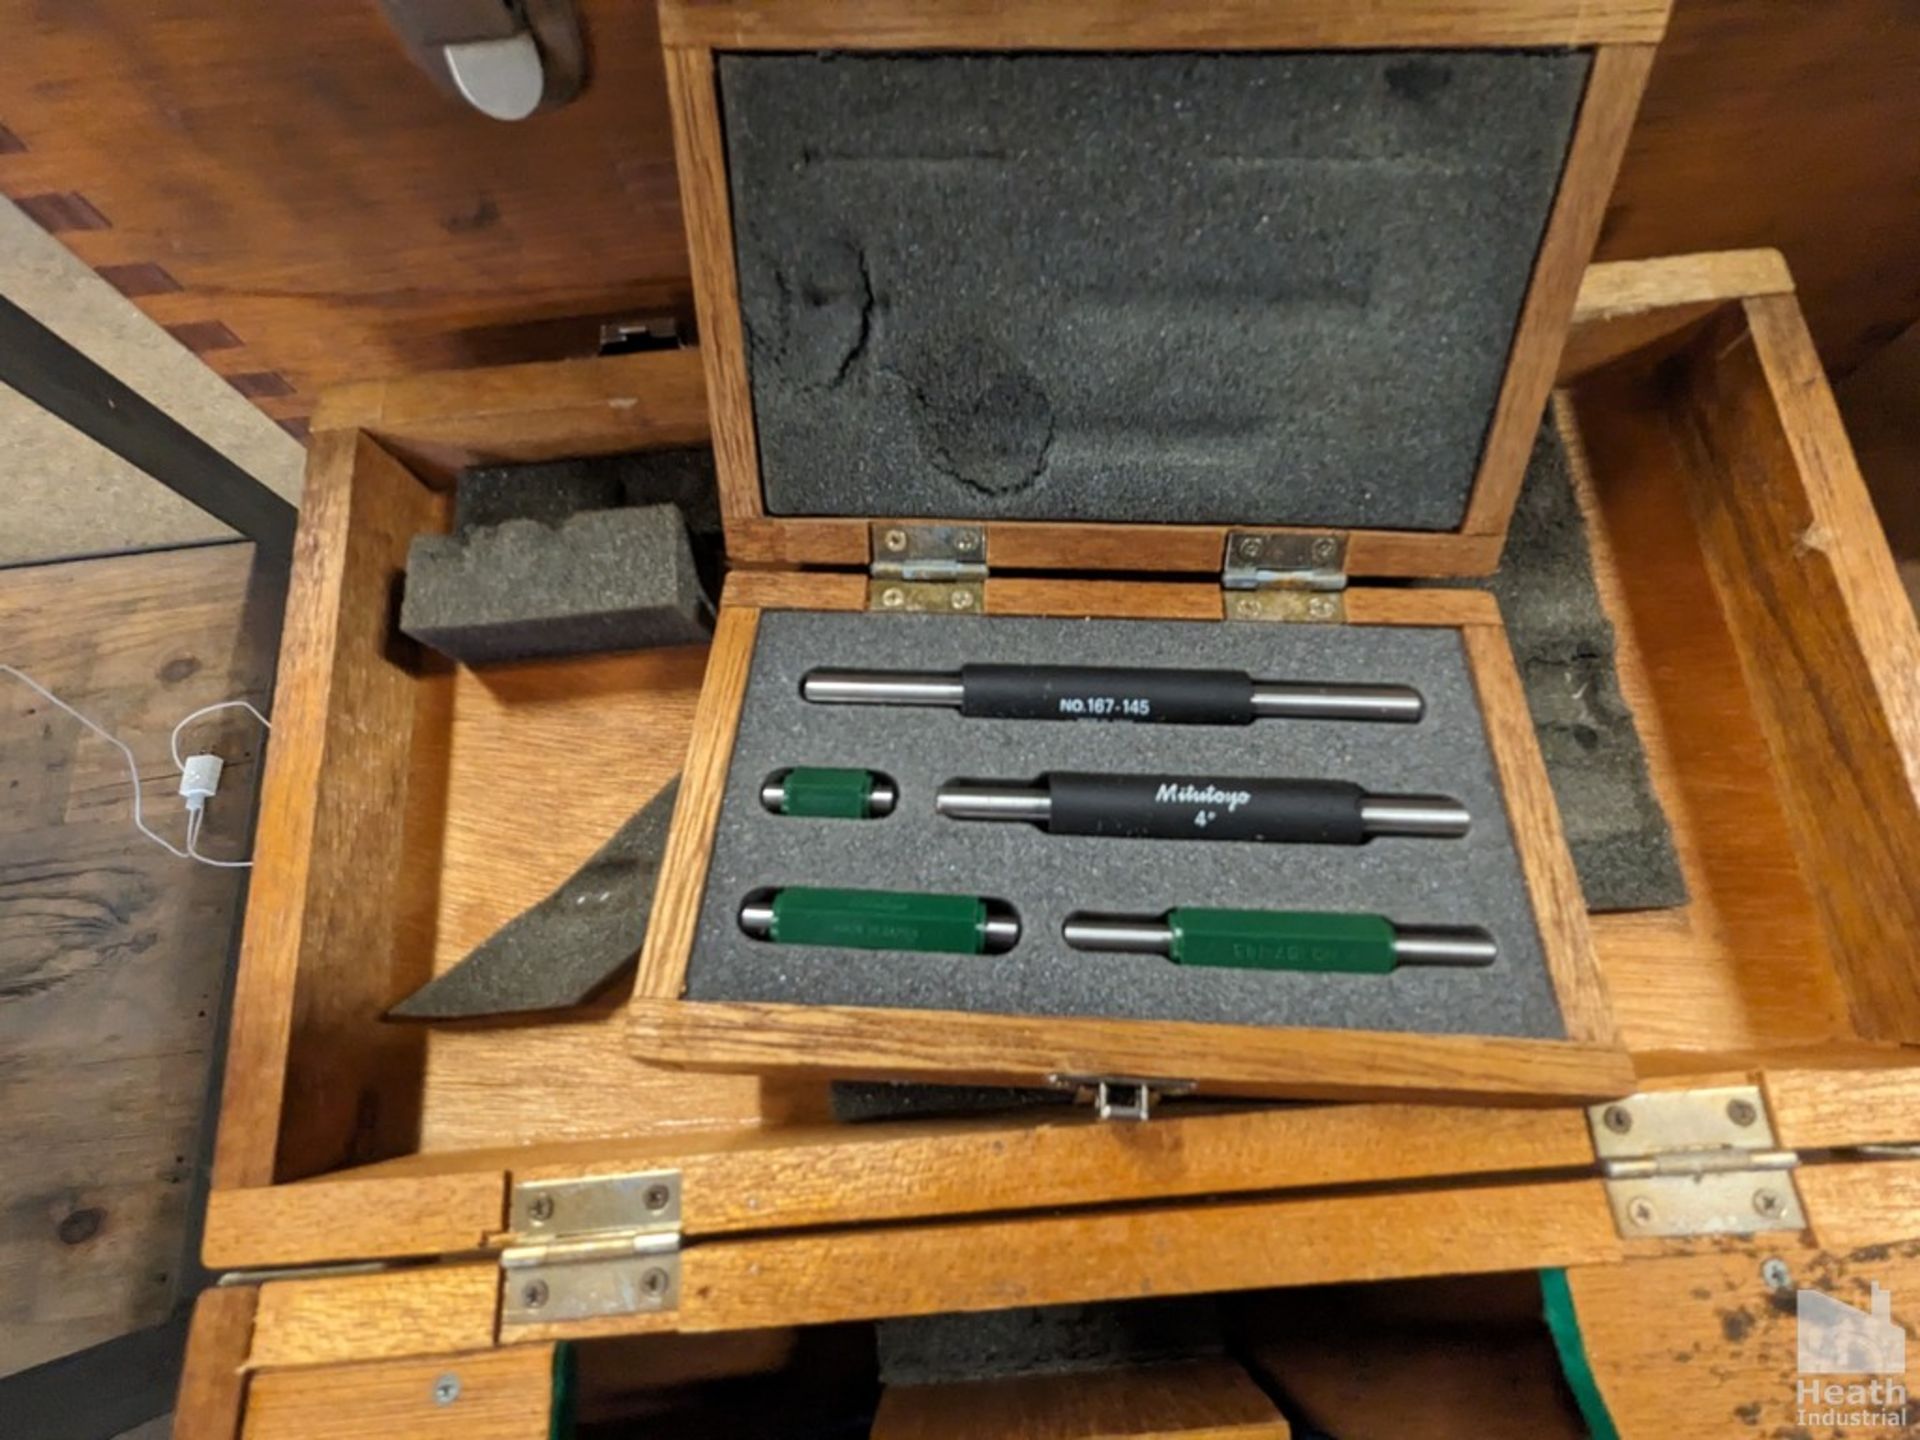 0-6" RATCHETING MICROMETER SET (MADE IN CHINA) WITH MITUTOYO CASE AND STANDARDS - Image 2 of 3